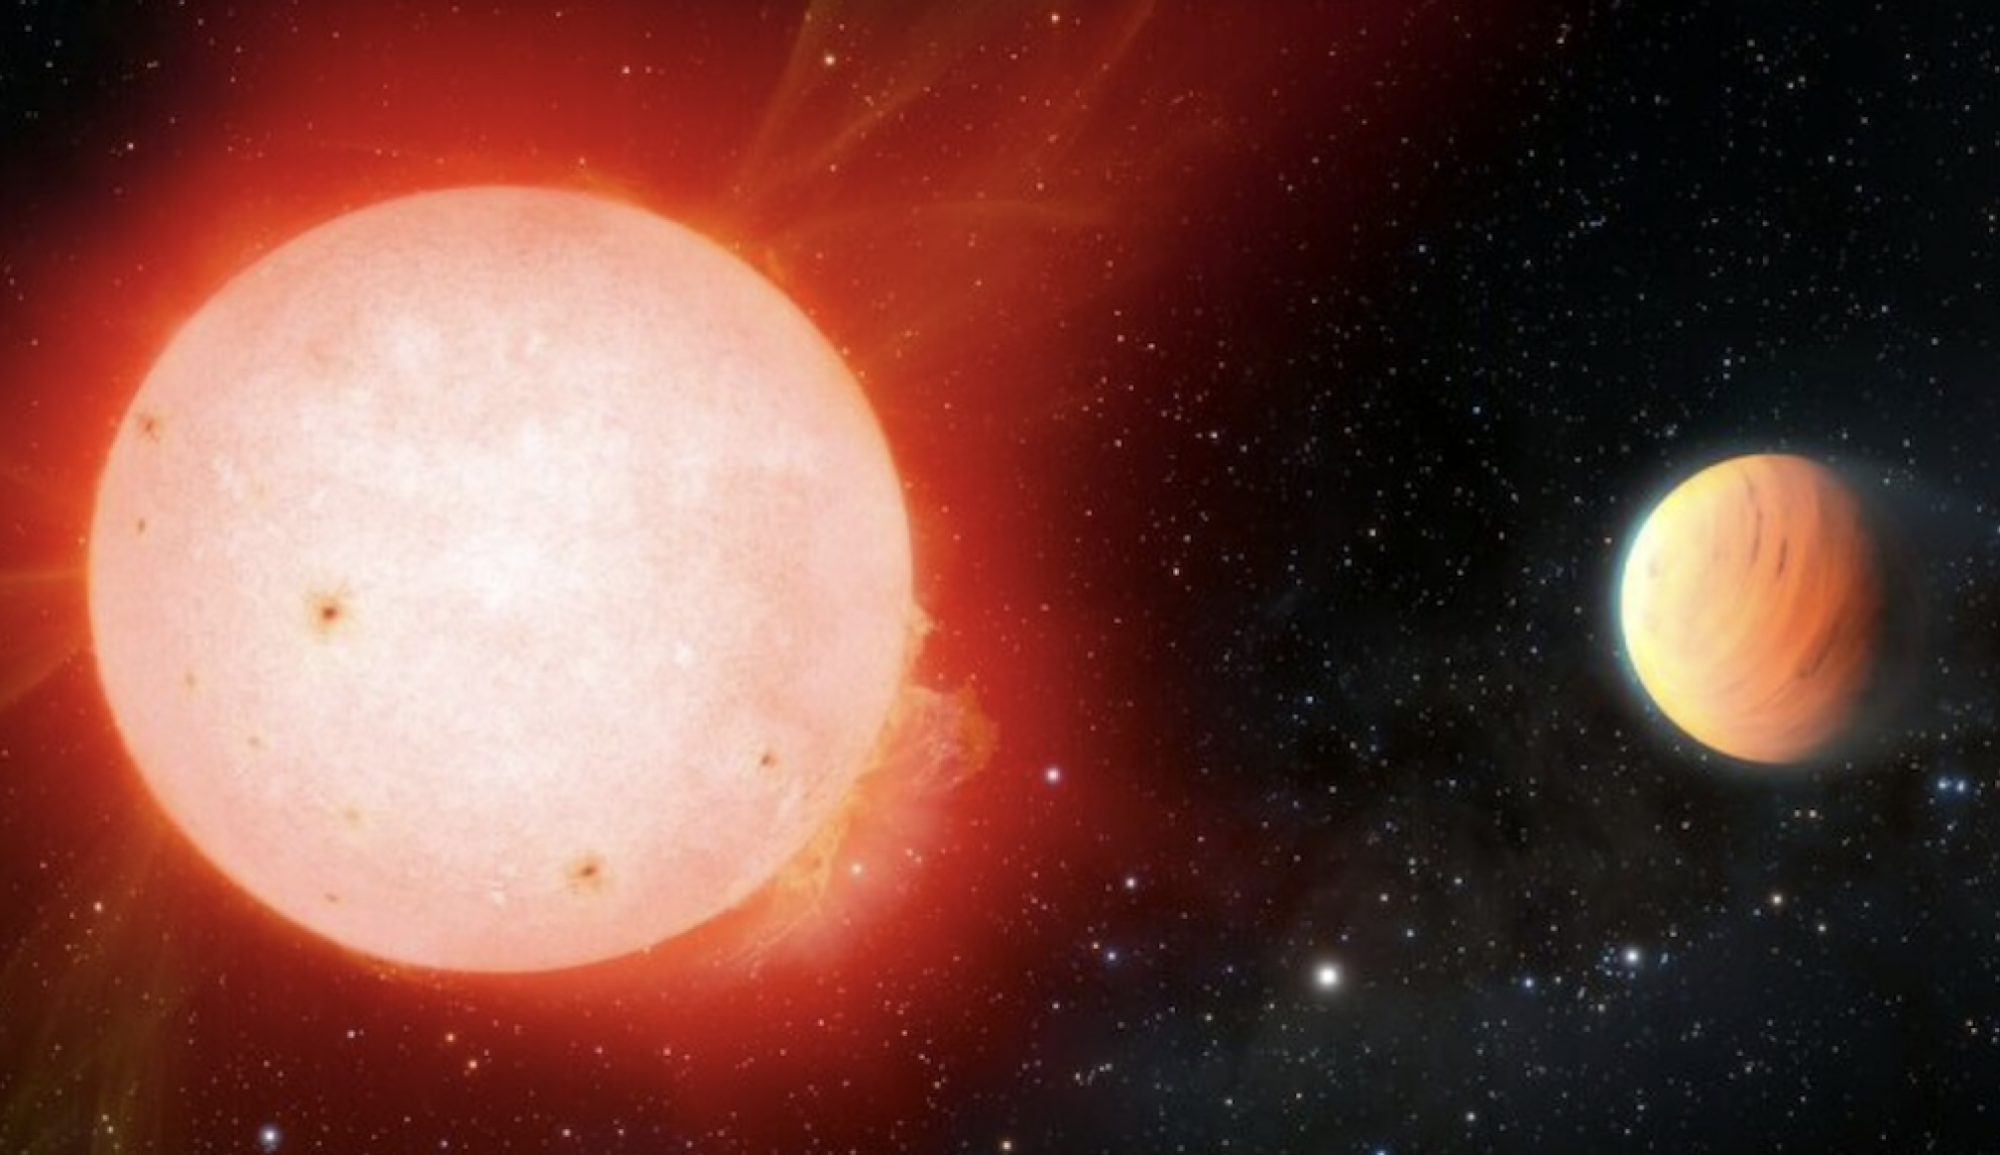 An artist's conception of a red dwarf star orbited by a marshmallow-like exoplanet (on right)